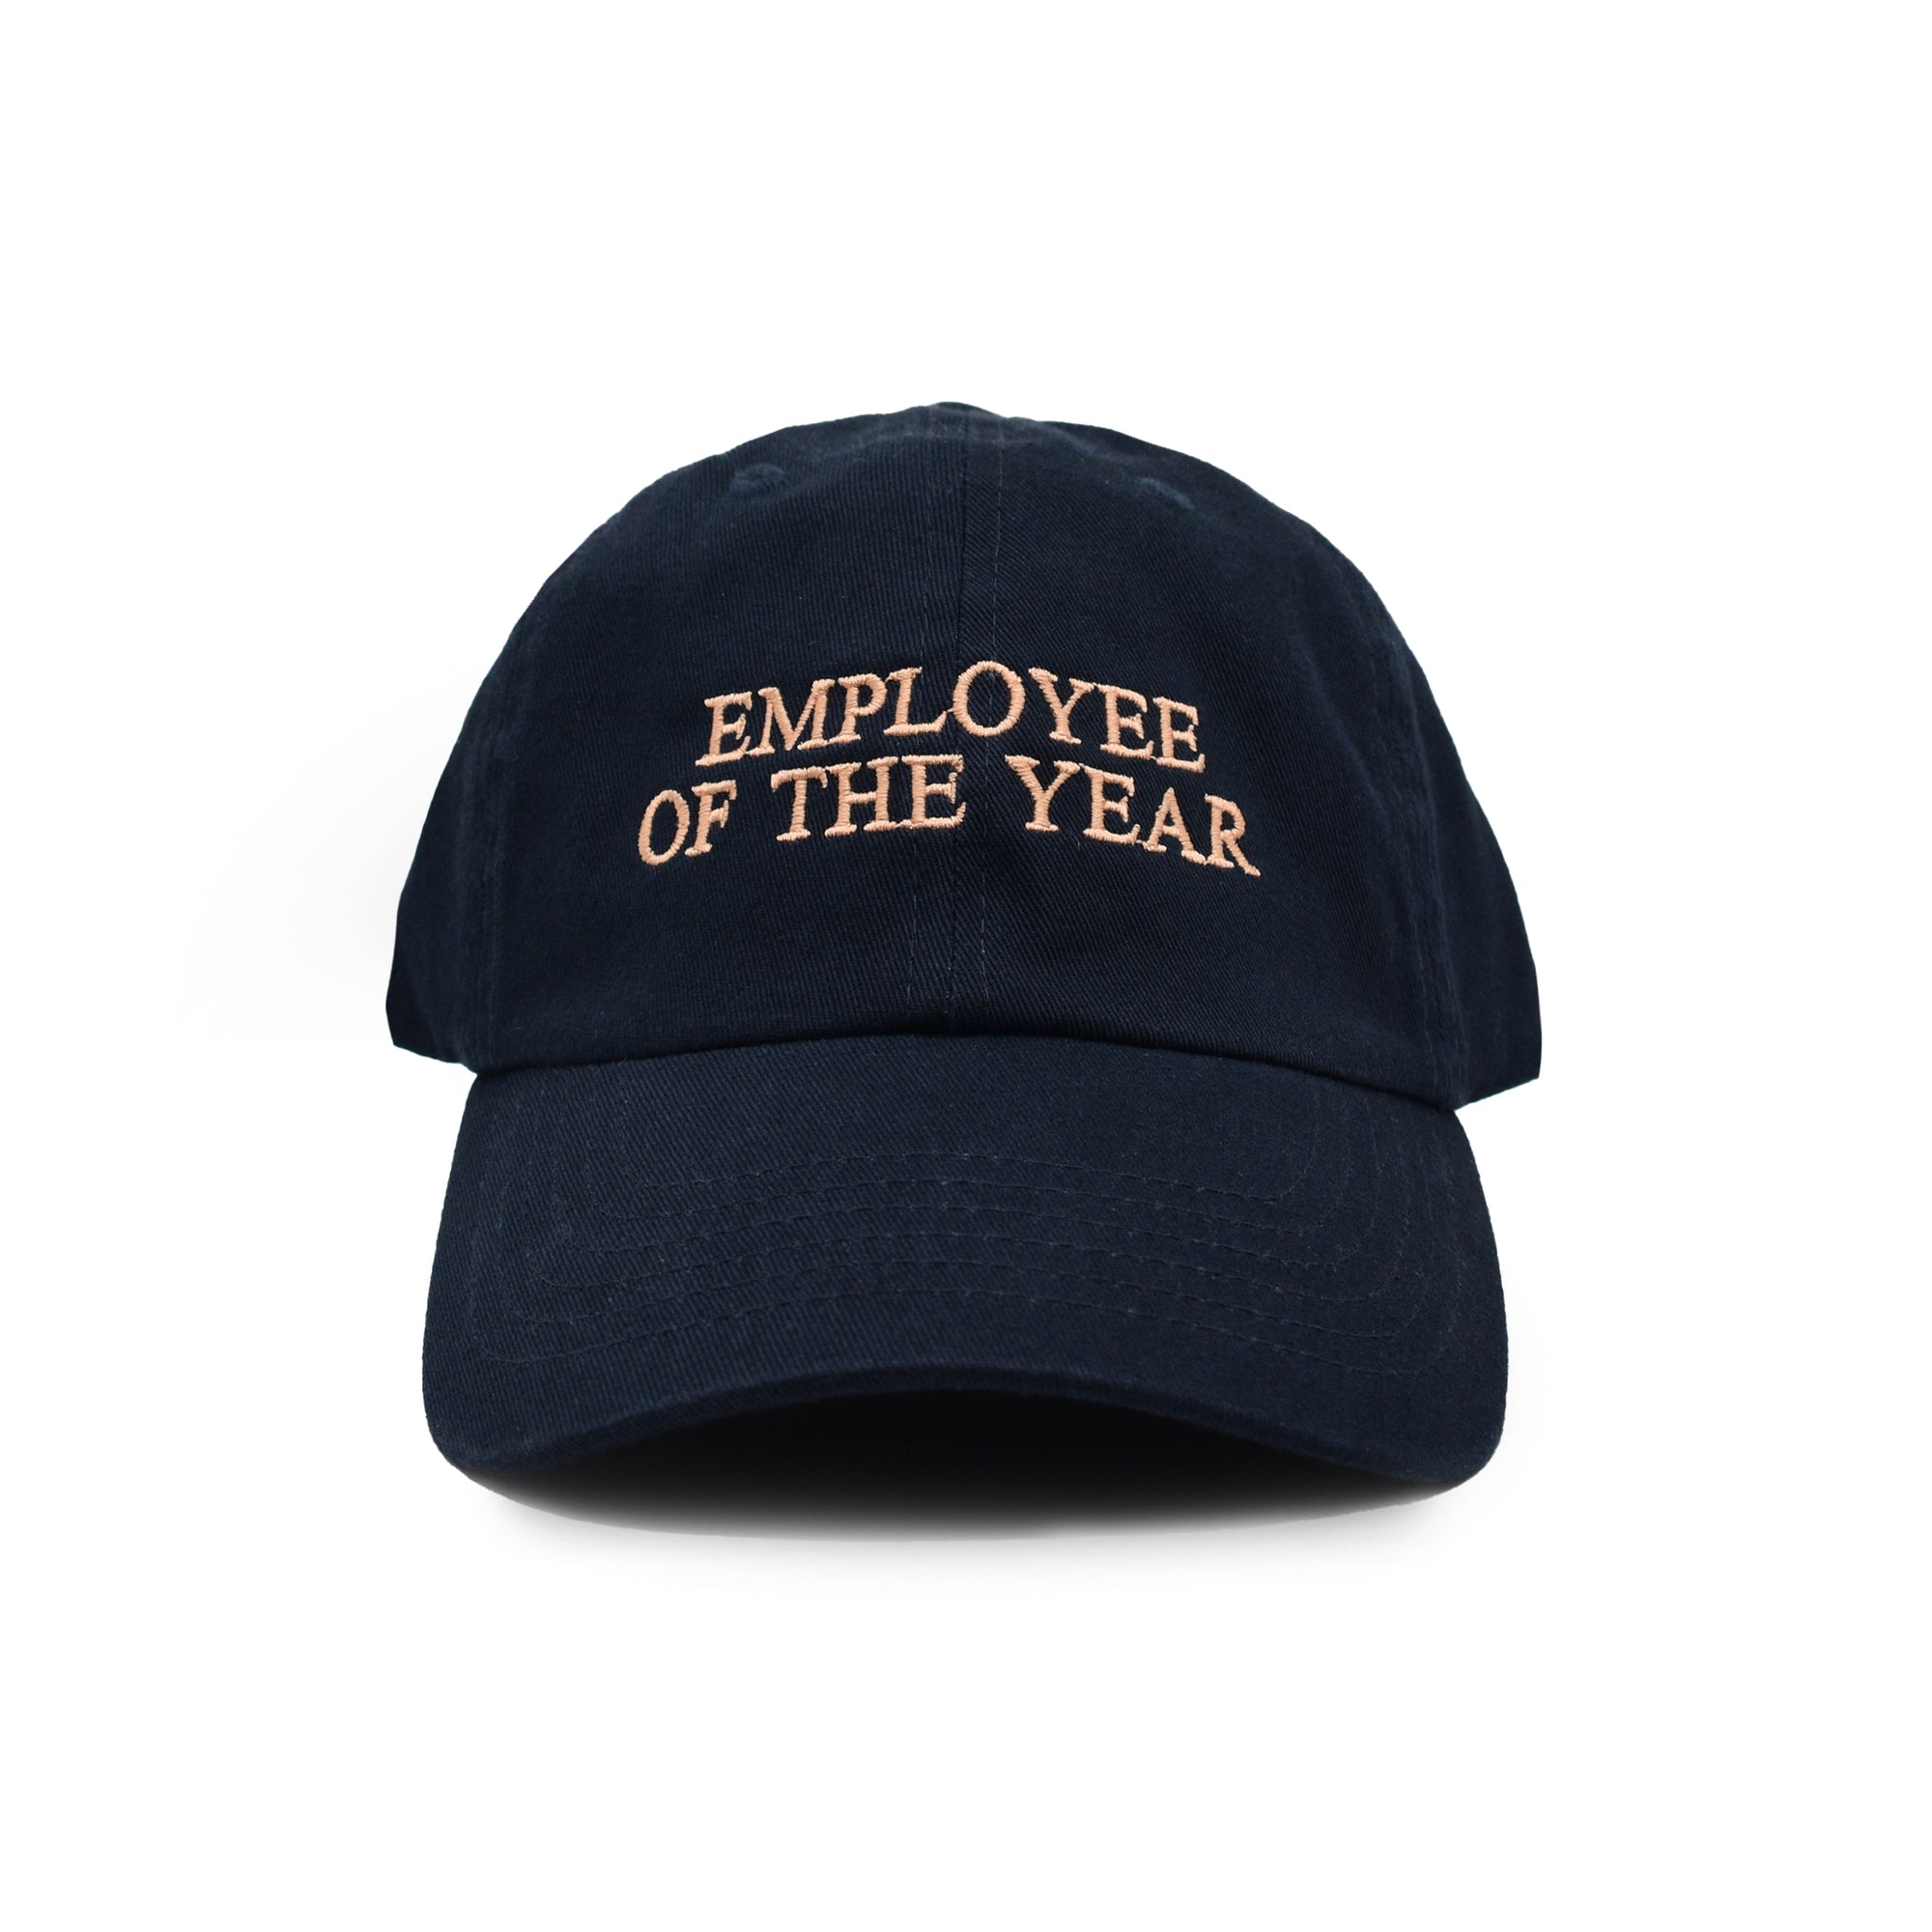 EMPLOYEE OF THE YEAR